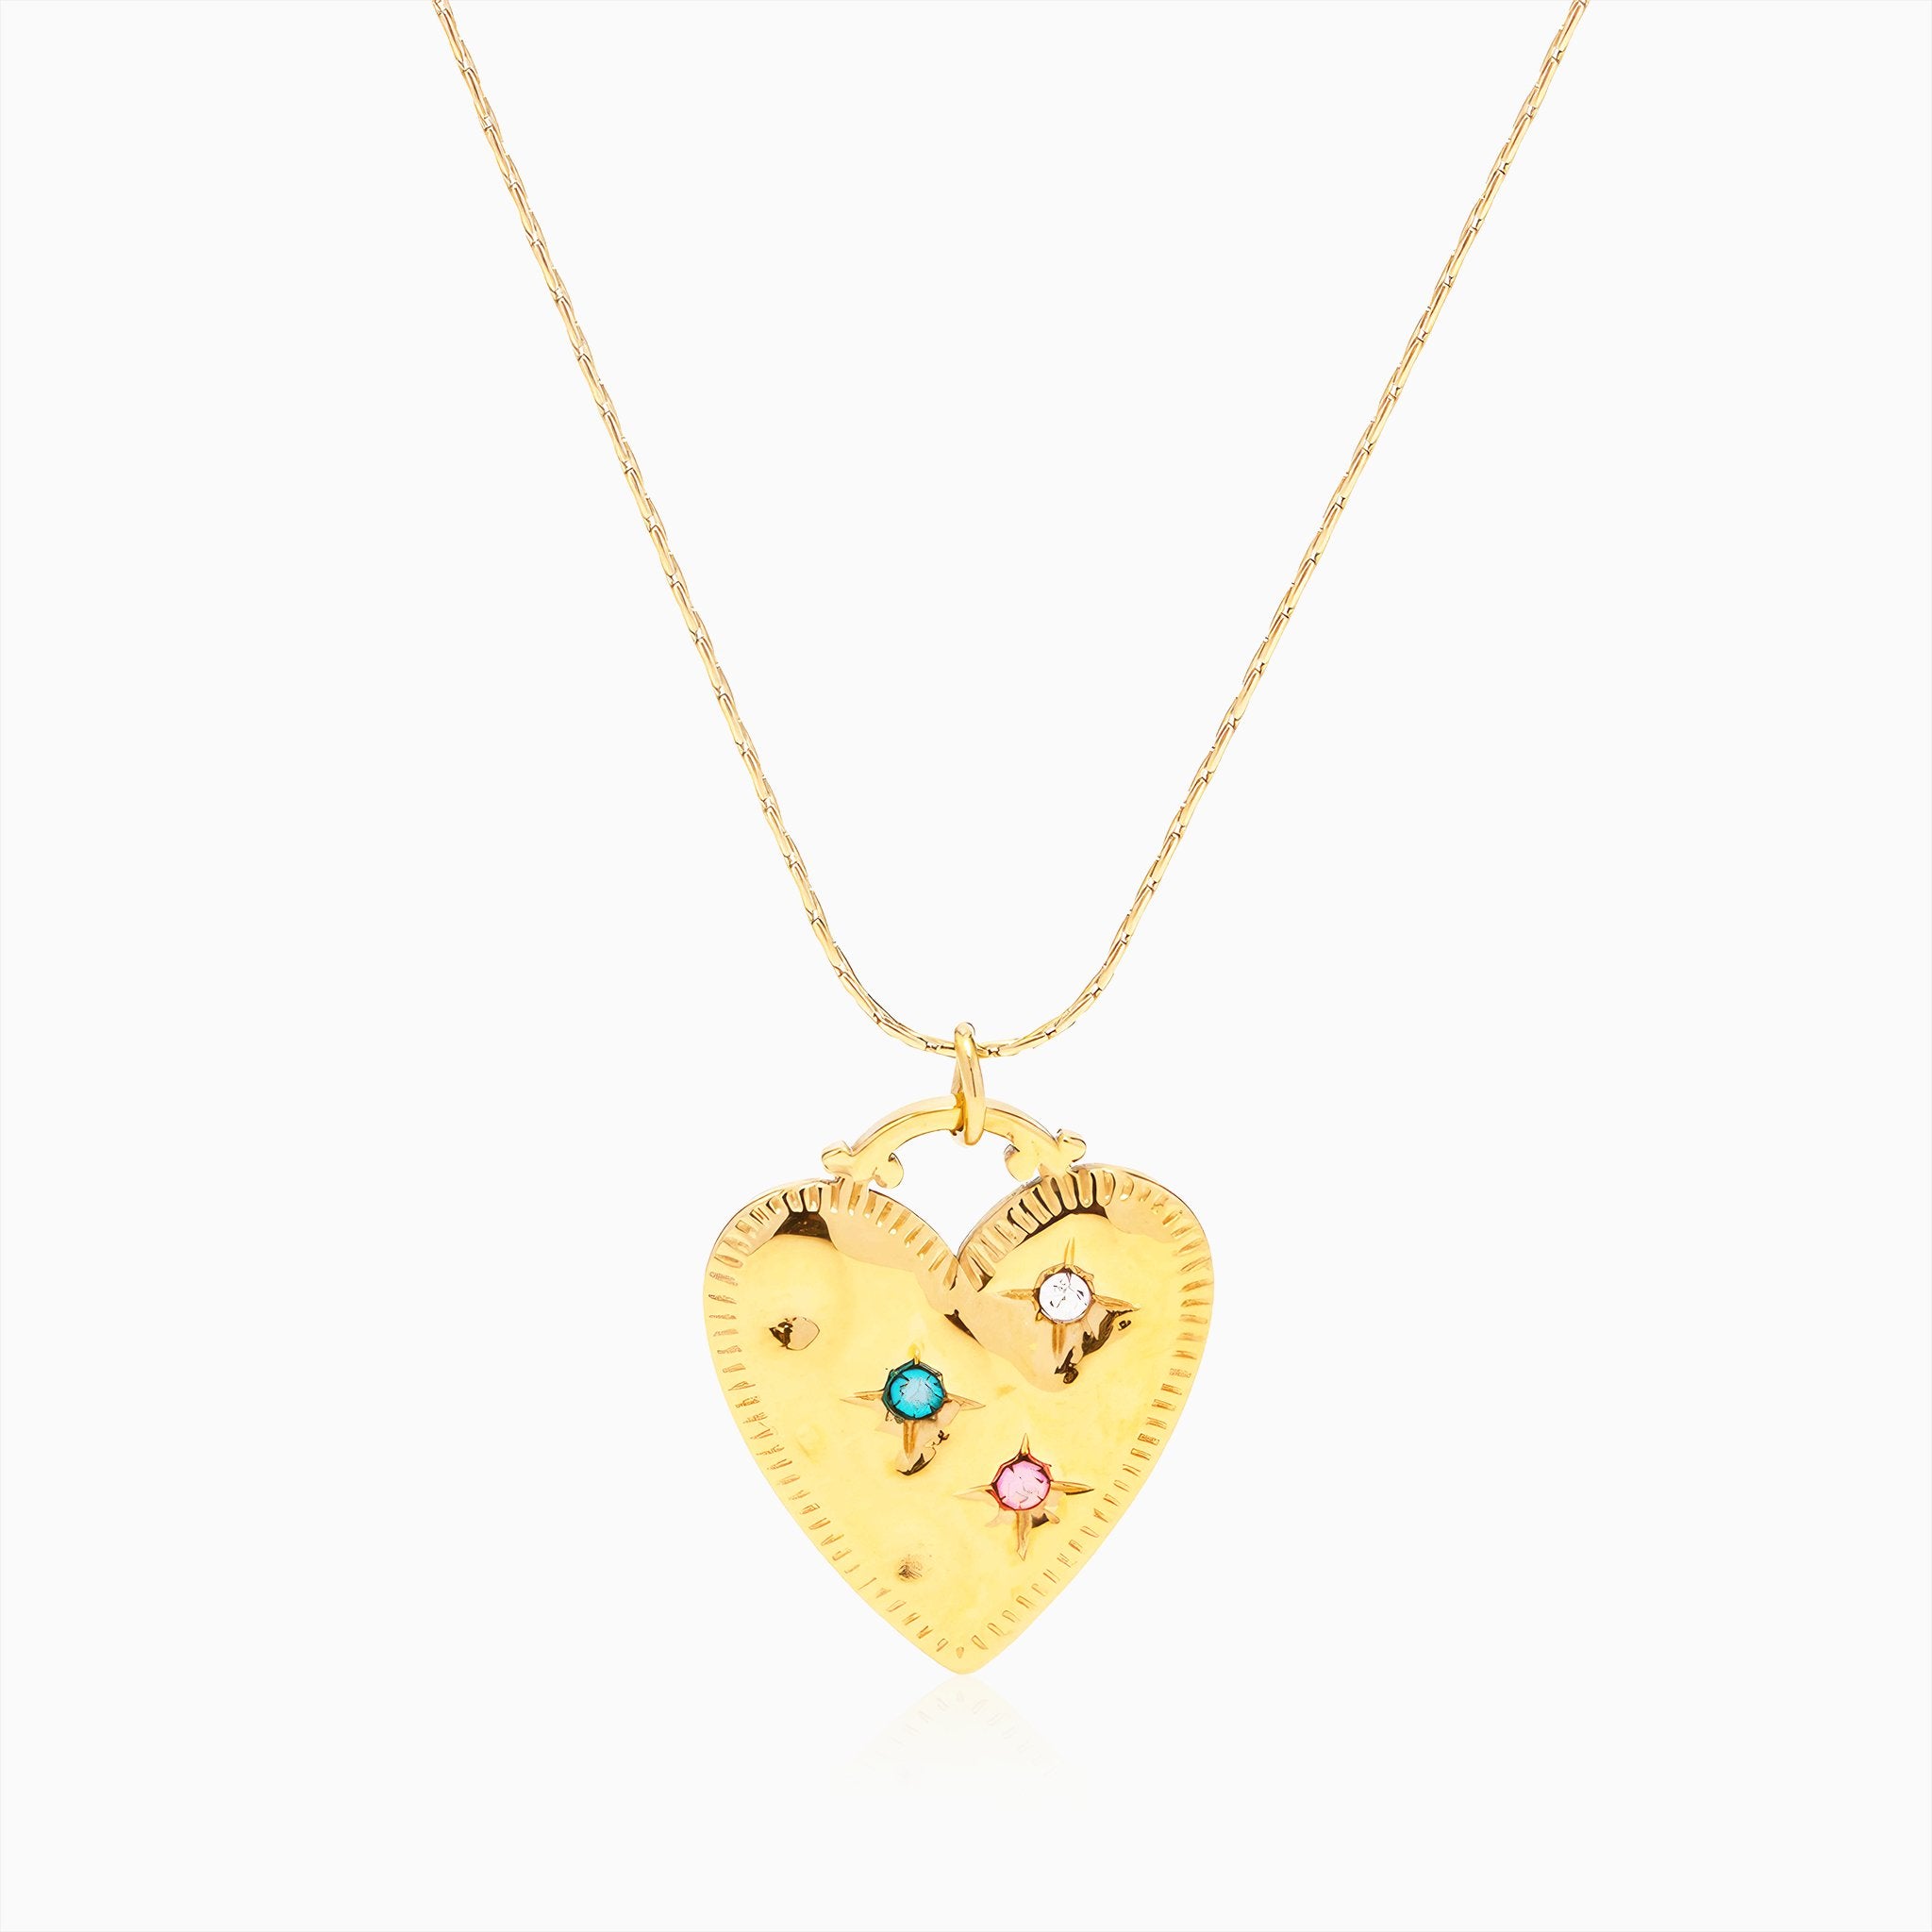 Heart Pendant Necklace - Nobbier - Necklace - 18K Gold And Titanium PVD Coated Jewelry